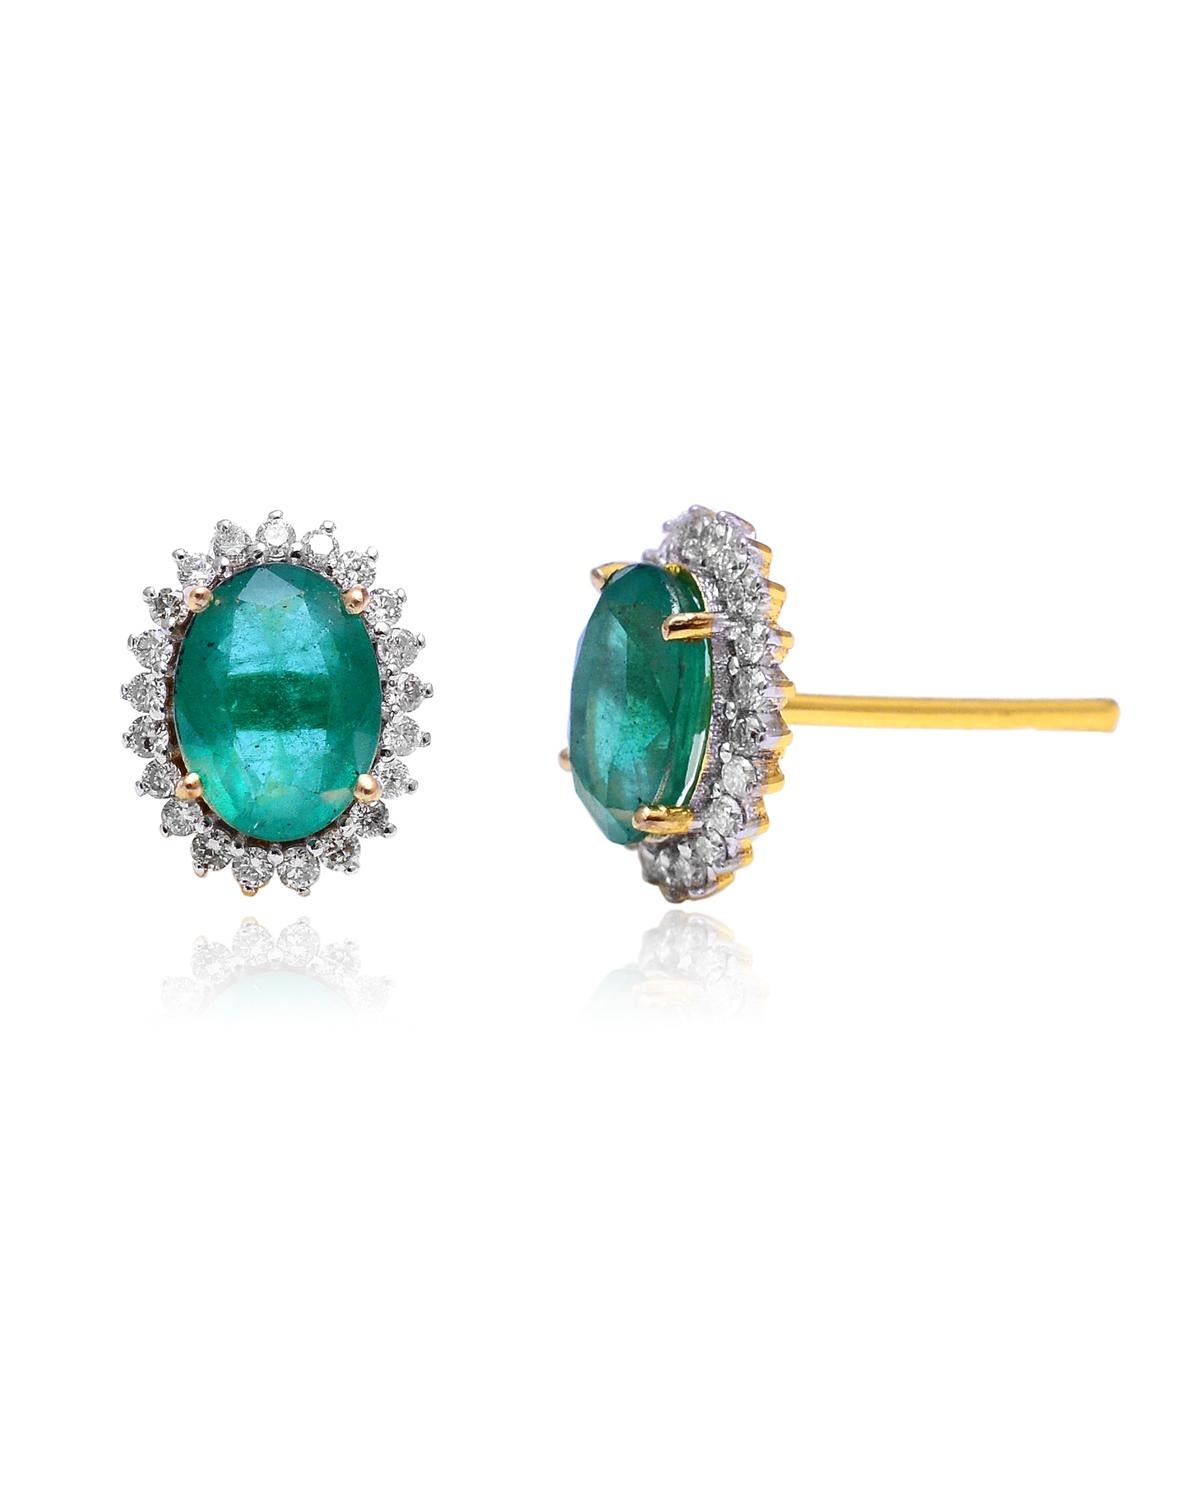 These earrings are made with emerald gemstones and diamond. They are set in 18K gold. Shine all day long in this delicate pair of stud earrings. Perfect for gifting, they twinkle with timeless elegance. Easy to mix and match with other jewellery